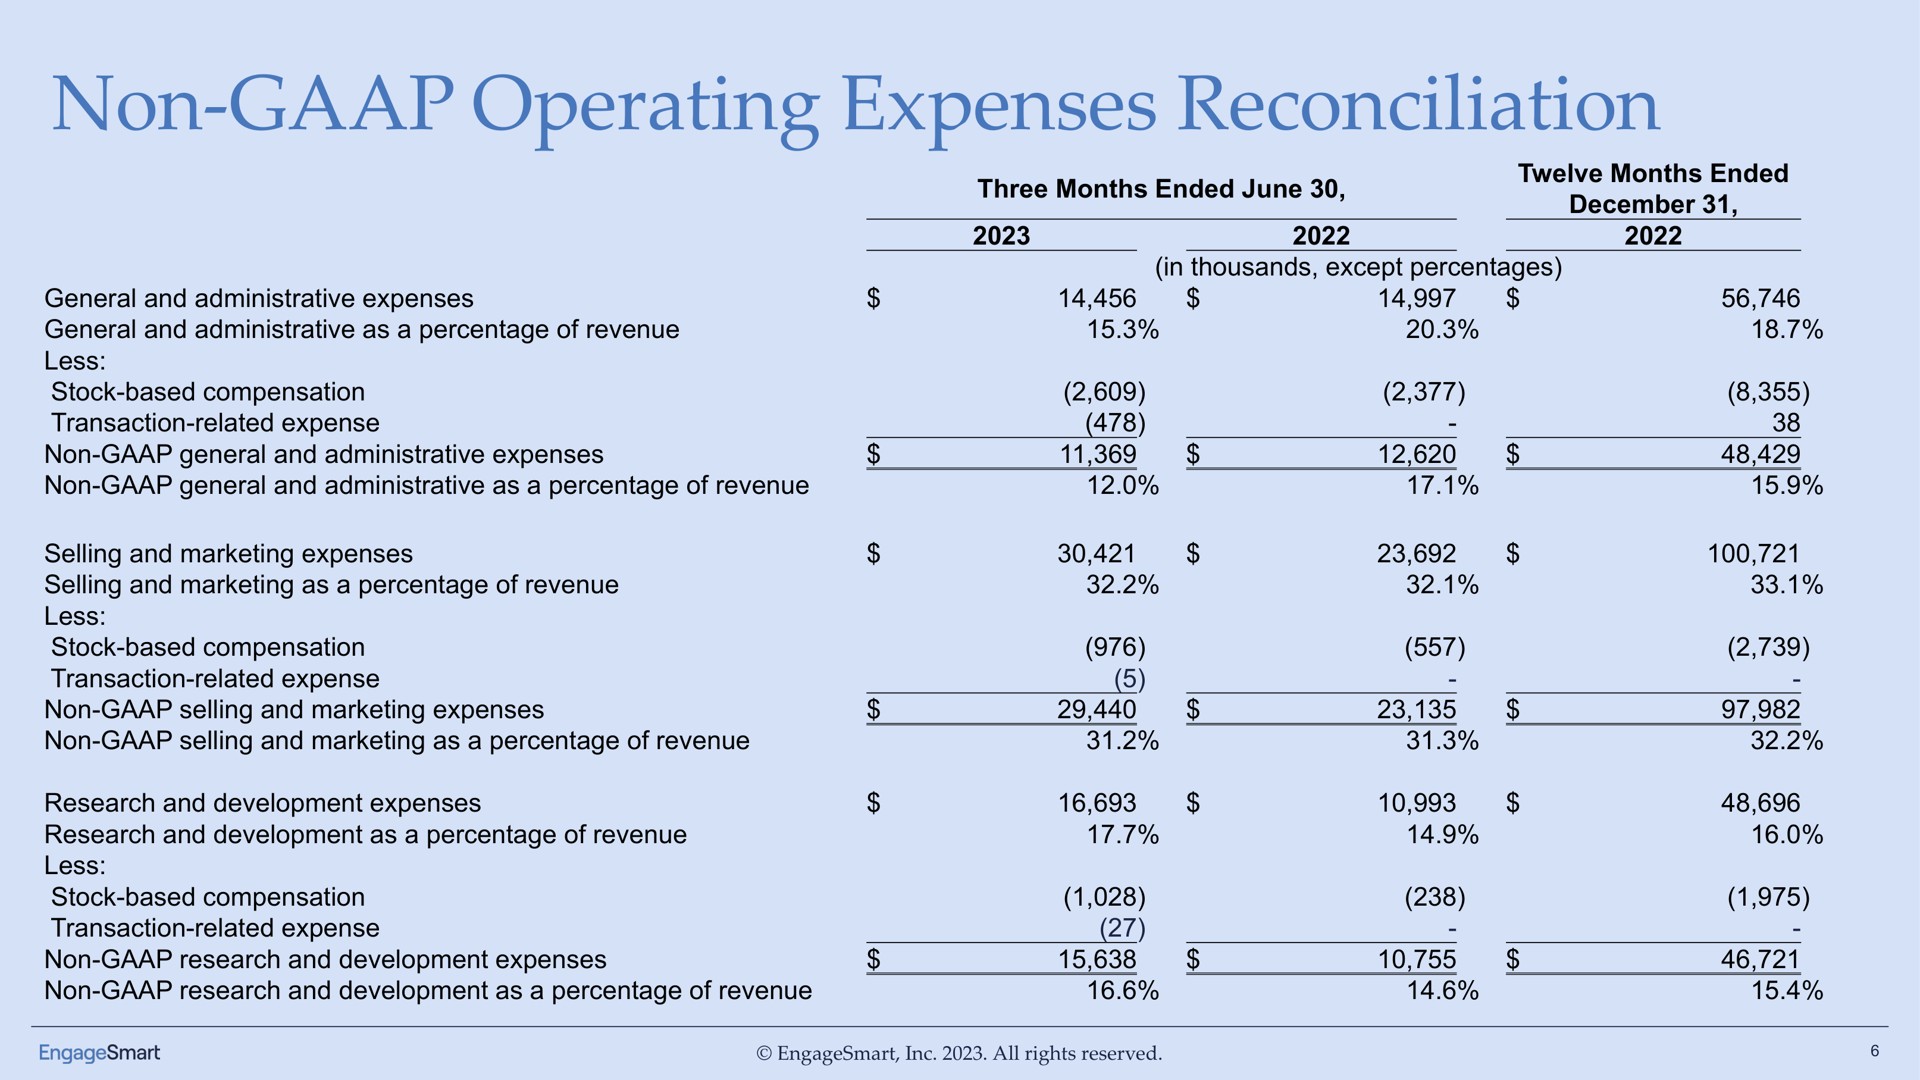 non operating expenses reconciliation | EngageSmart